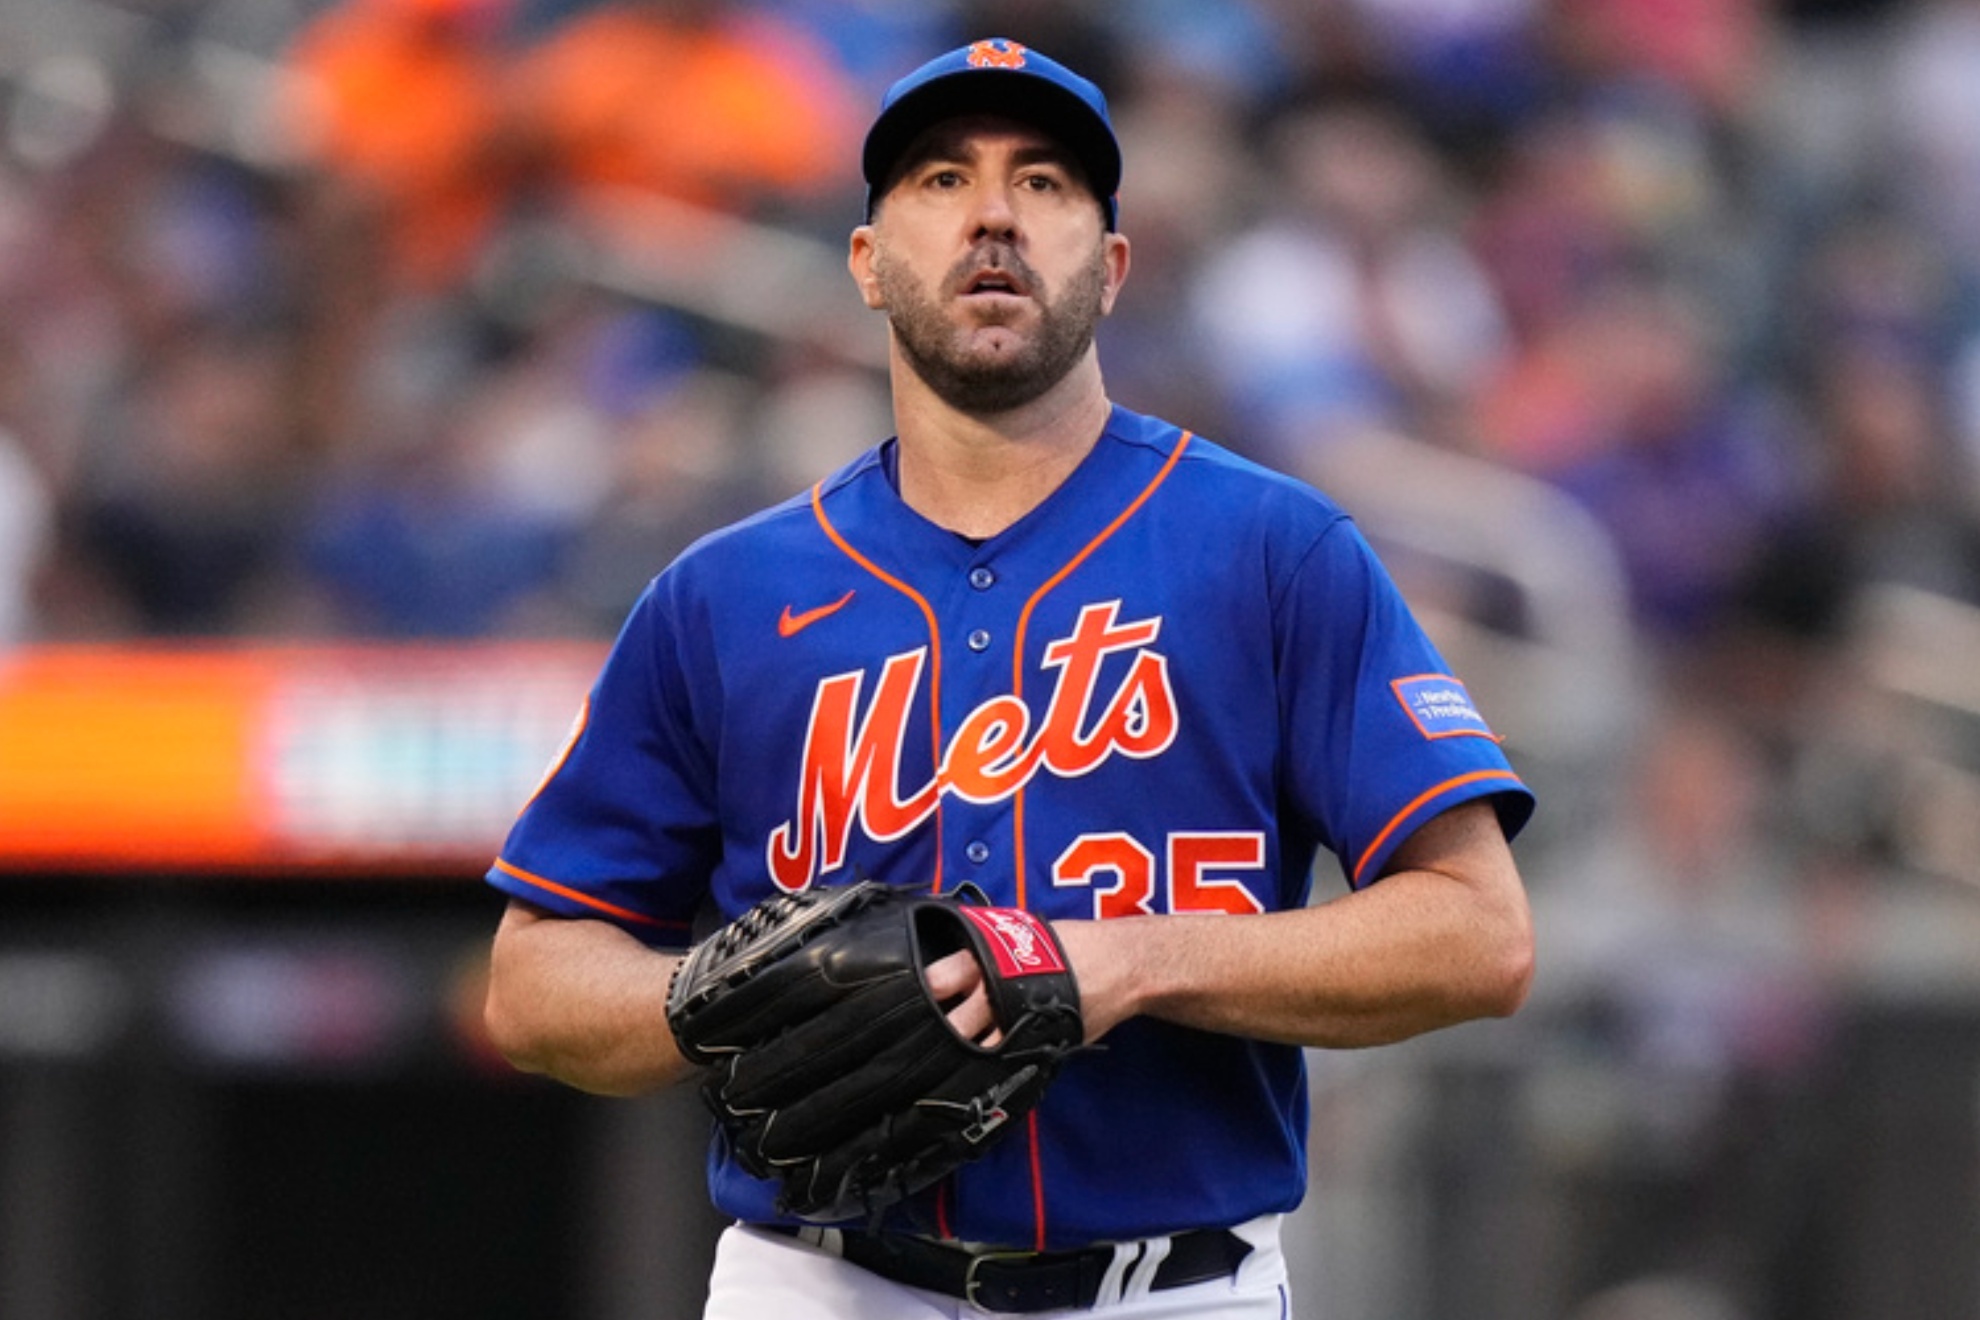 Mets pitcher Justin Verlander could be traded ahead of the MLB deadline